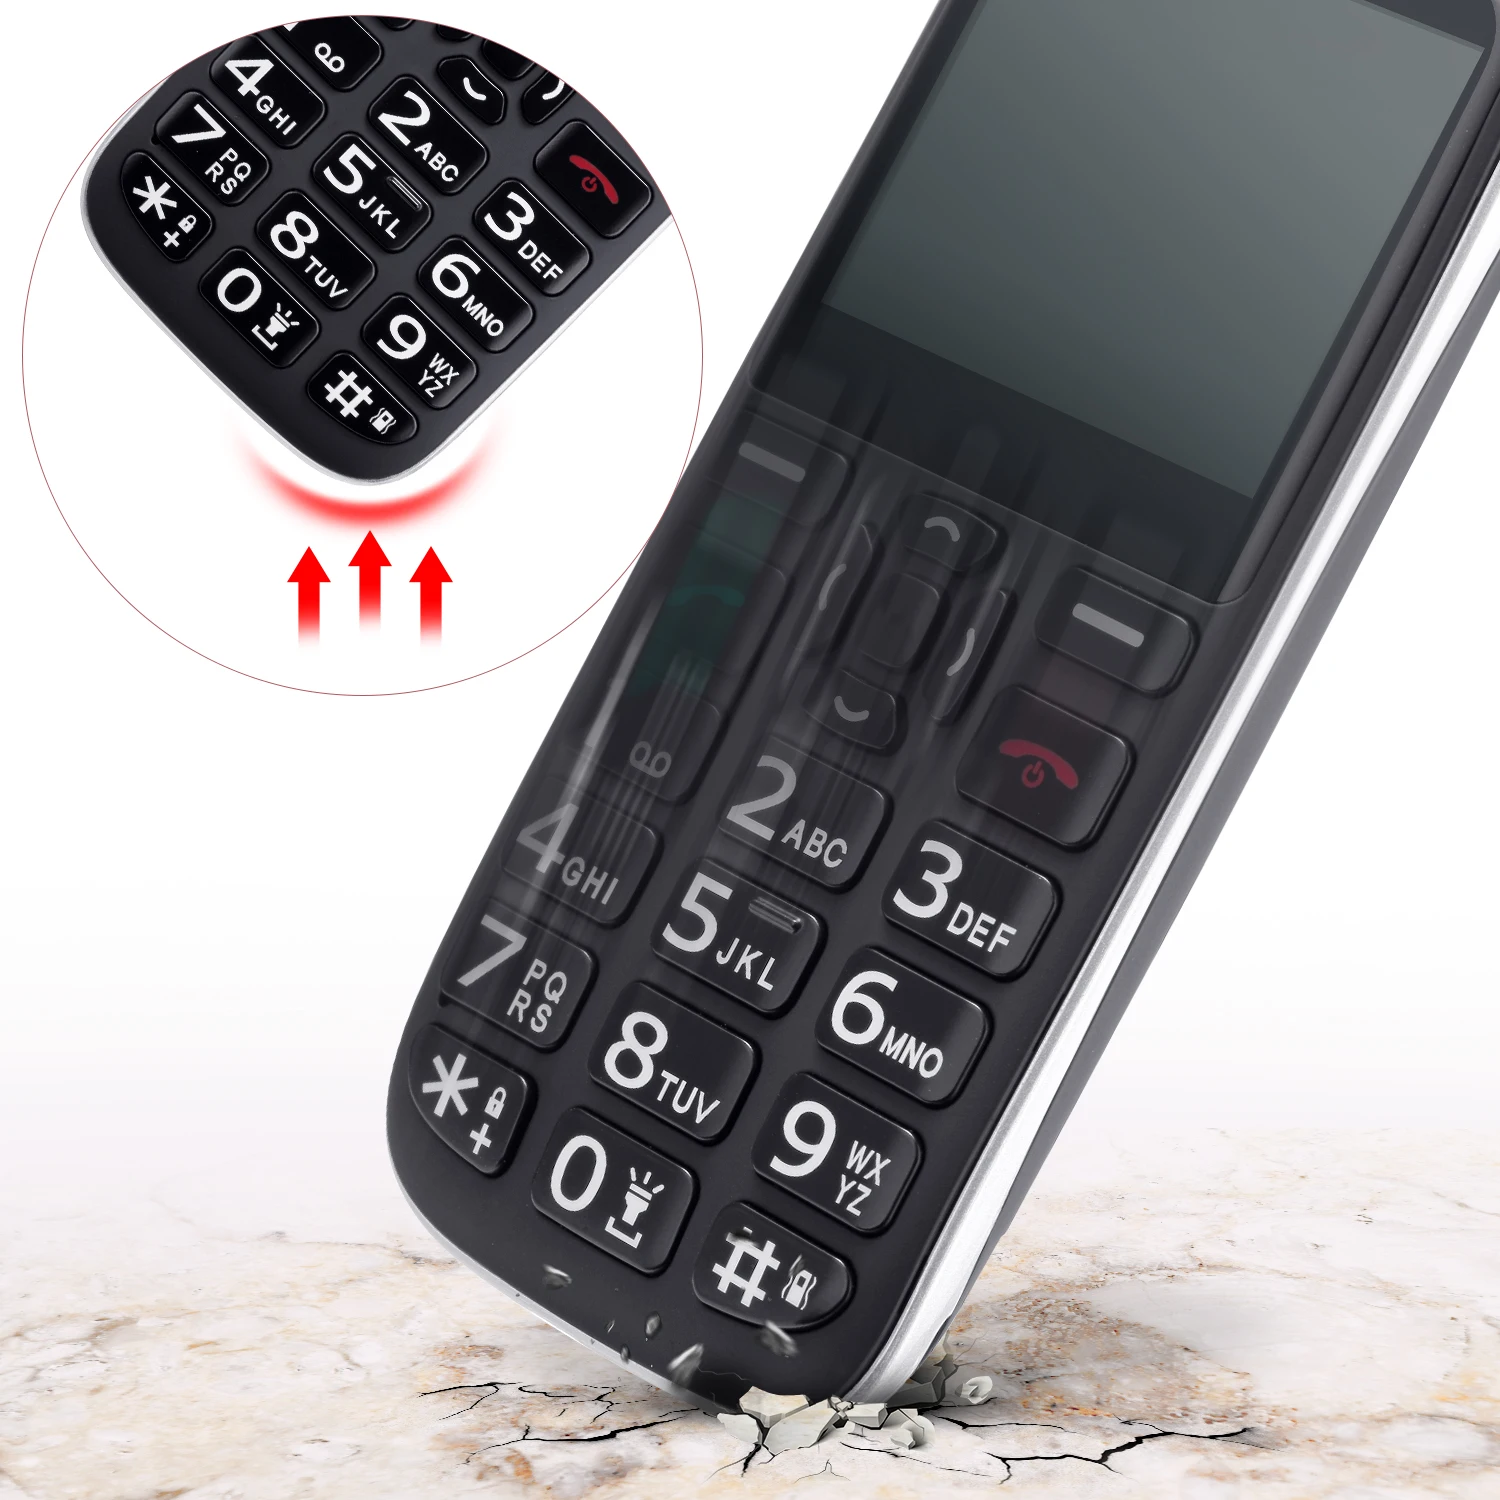 4G seniors mobile phone with SOS emergency button (as shown Other) 43